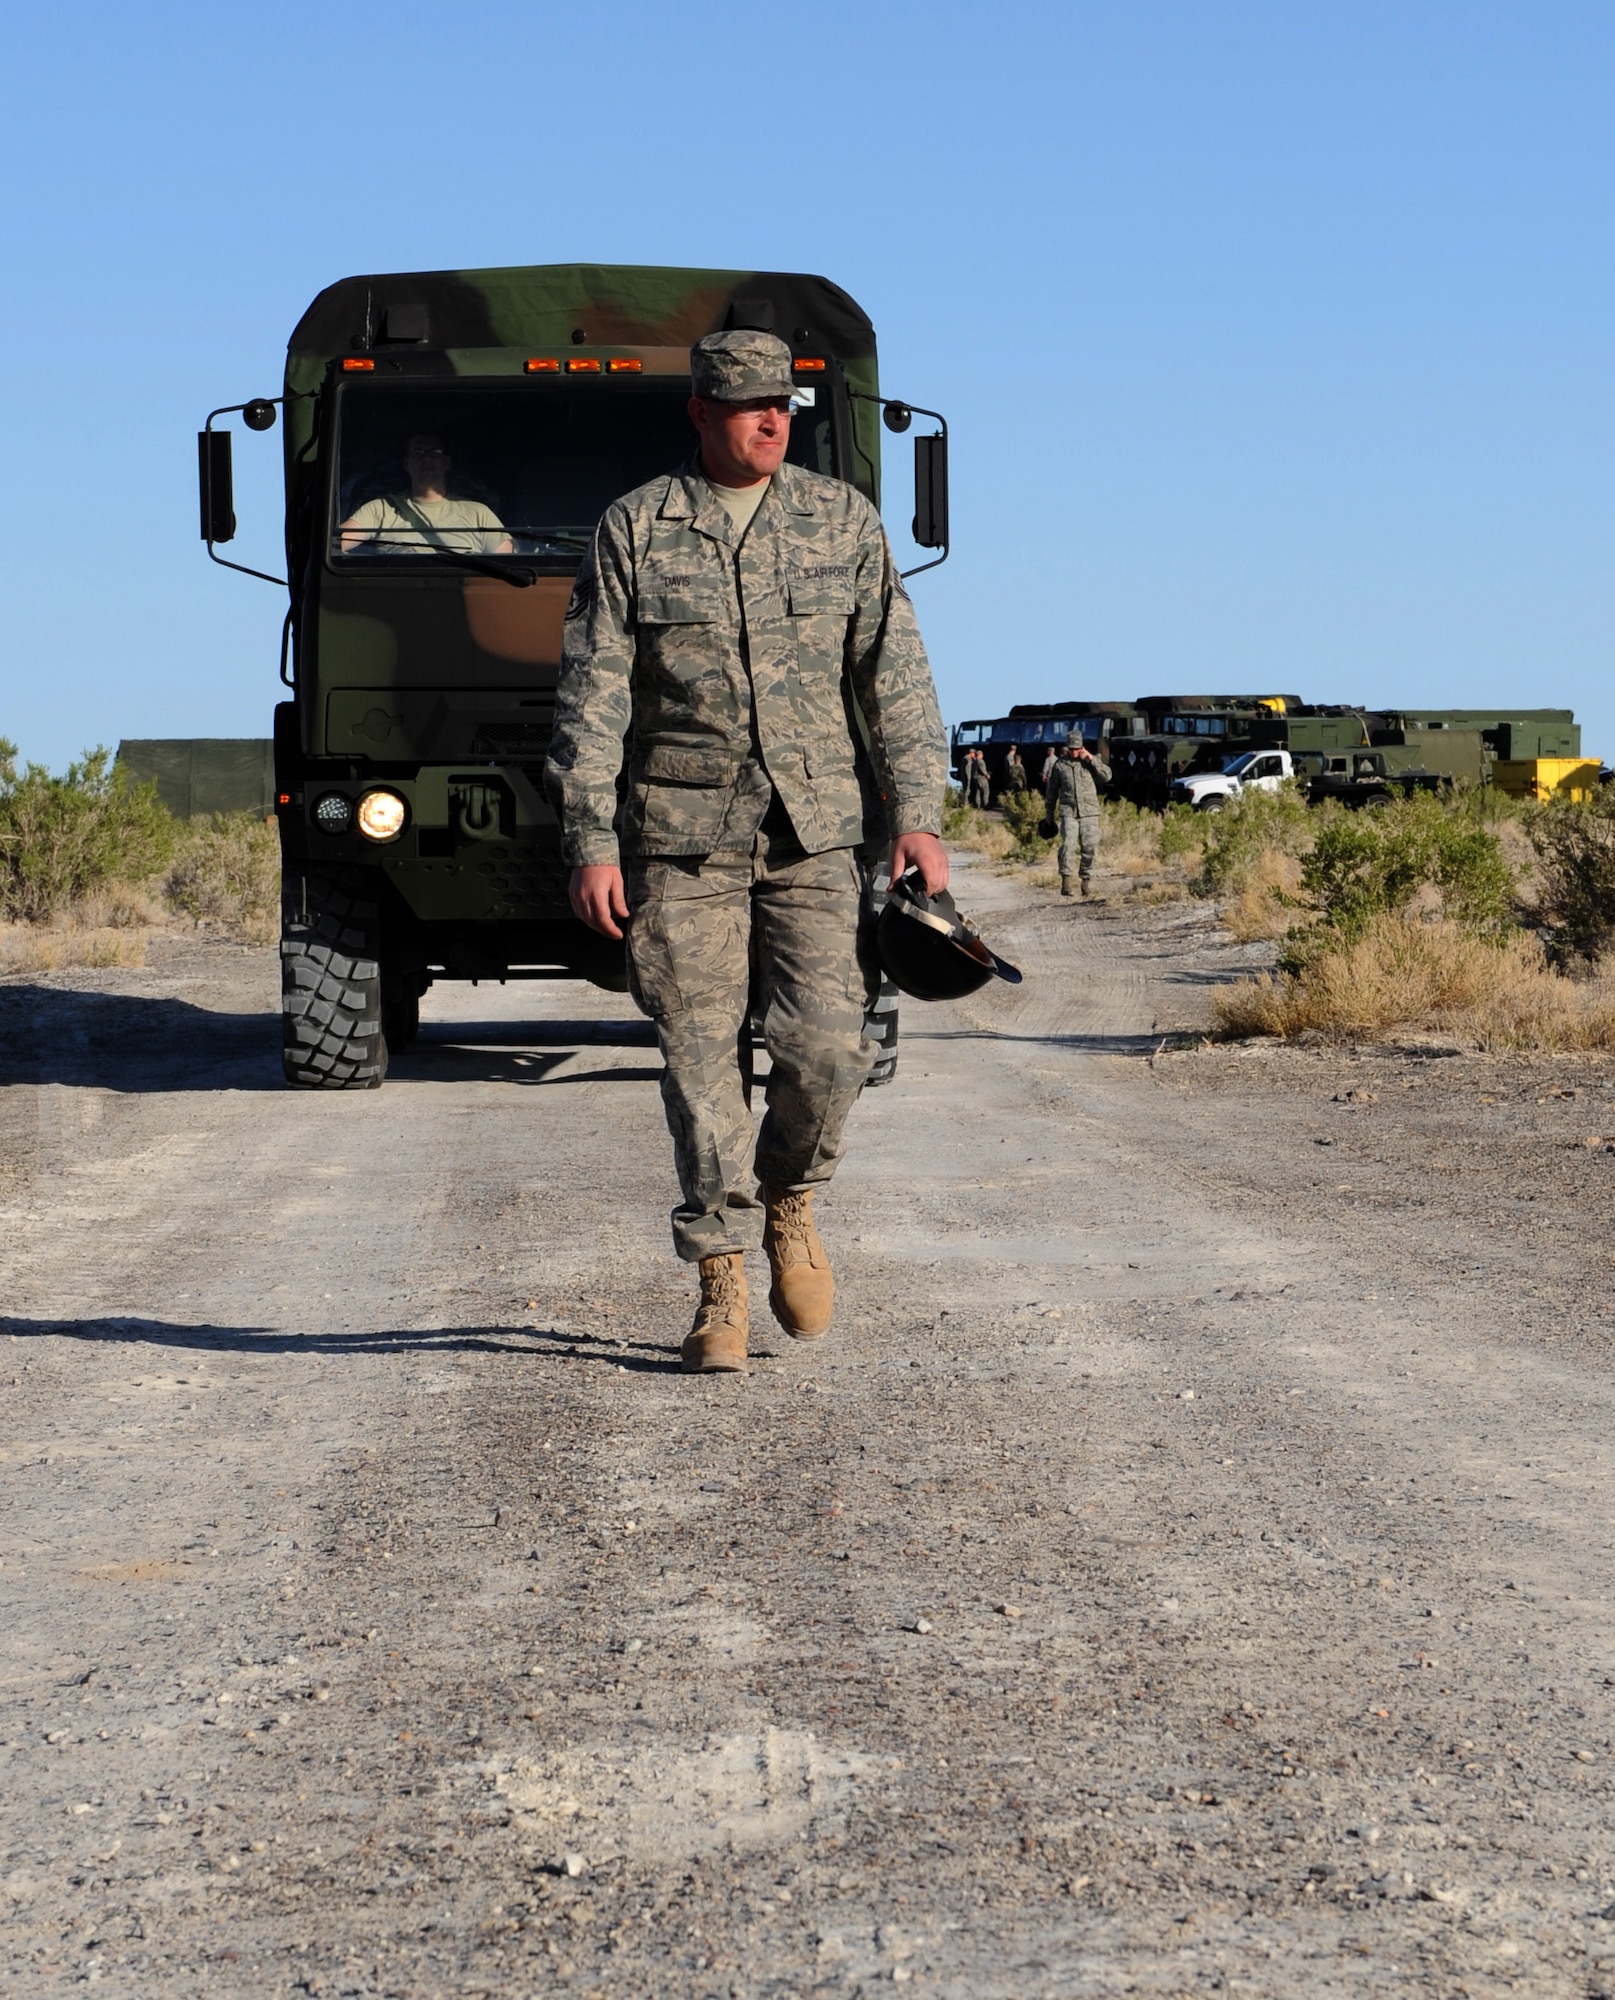 WENDOVER, Utah – Tech. Sgt. Corey Davis, 726th Air Control Squadron ground radio systems superintendent, leads a five-ton vehicle to a site at Wendover, Utah, during a week-long exercise May 8. The 726th ACS tackles a wide-spread mission including enemy surveillance and identification, weapons control, joint and combined data-link connectivity, and battle management of offensive and defensive air activities. The squadron is made up of 27 different Air Force career fields, making it self-sustaining and able to deploy and fully operate without external support or help. (U.S. Air Force photo\Airman 1st Class Debbie Lockhart)